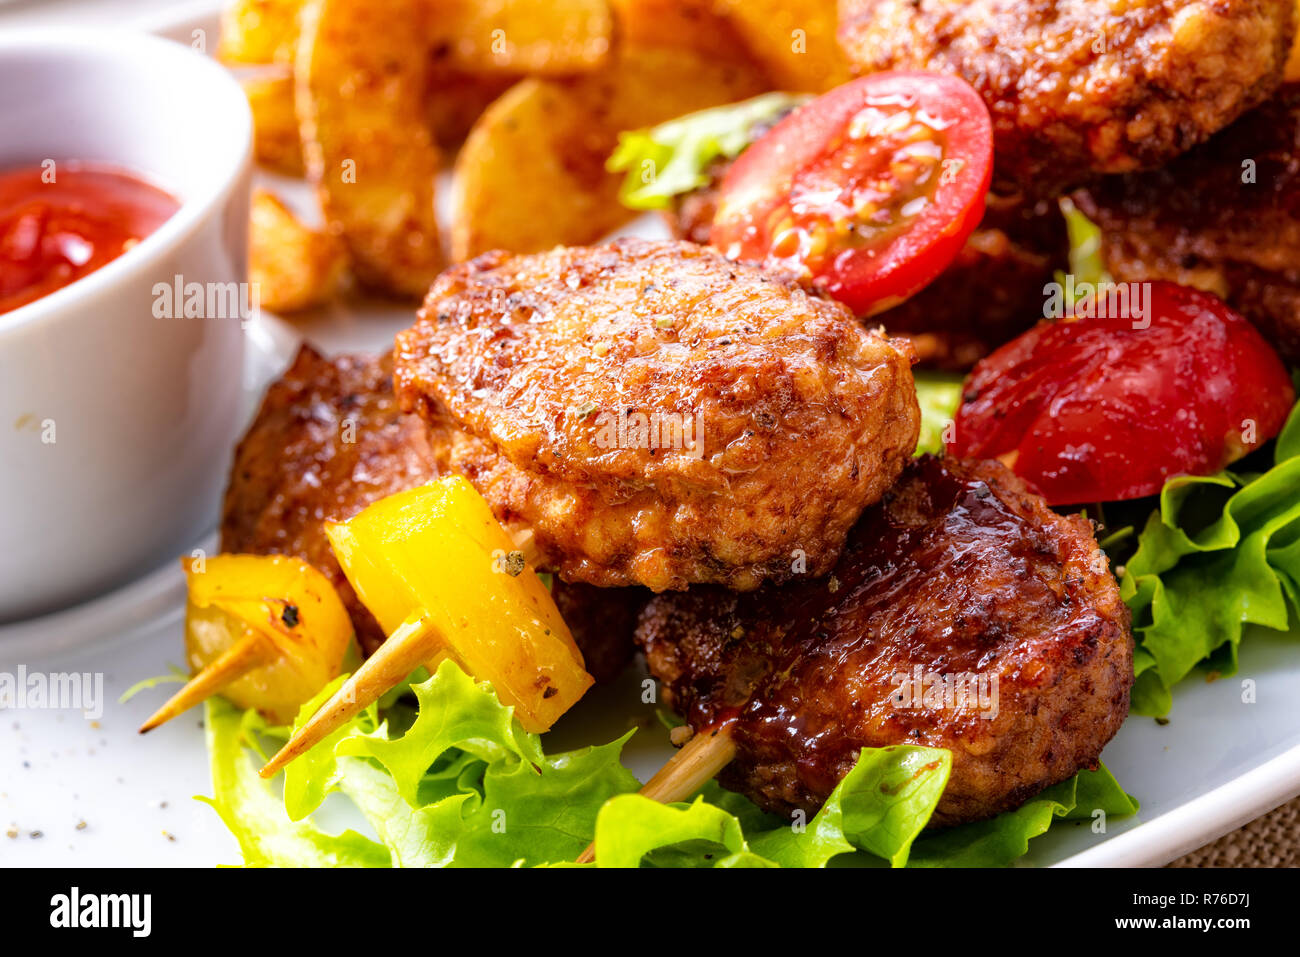 meatballs skewers of tomato,paprika and baked potato quarters Stock Photo